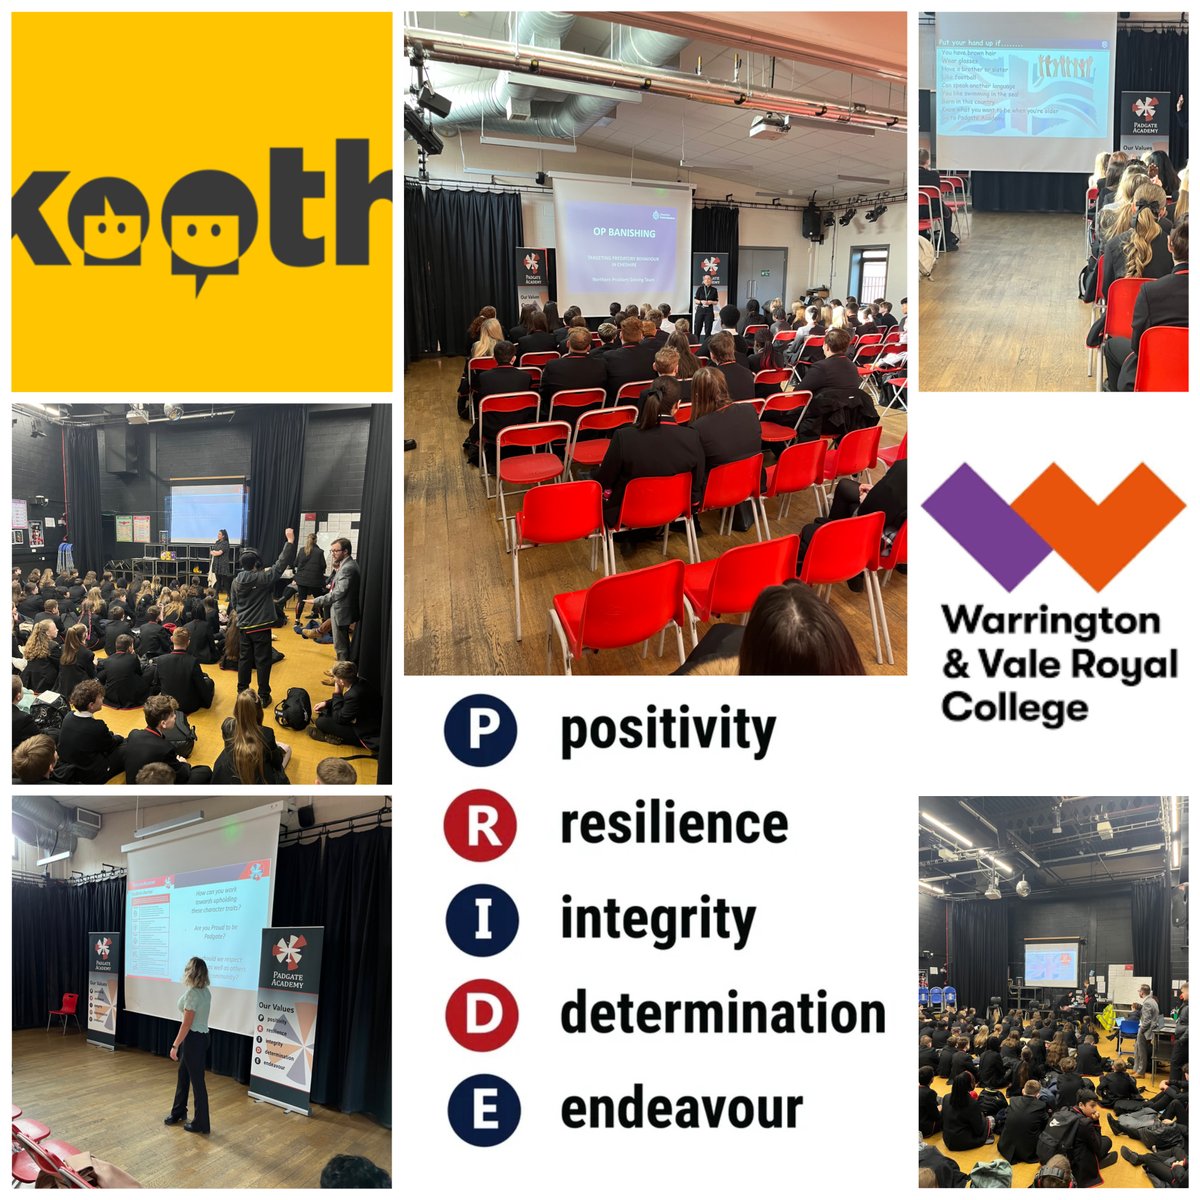 A massive thank you to Kooth and Cheshire police for mental health and safety assemblies and Warrington Vale for careers and aspirations.
#mental #health #safety
#values #character #education
#proudtobepadgate @wvrcollege @kooth_uk @cheshirepolice